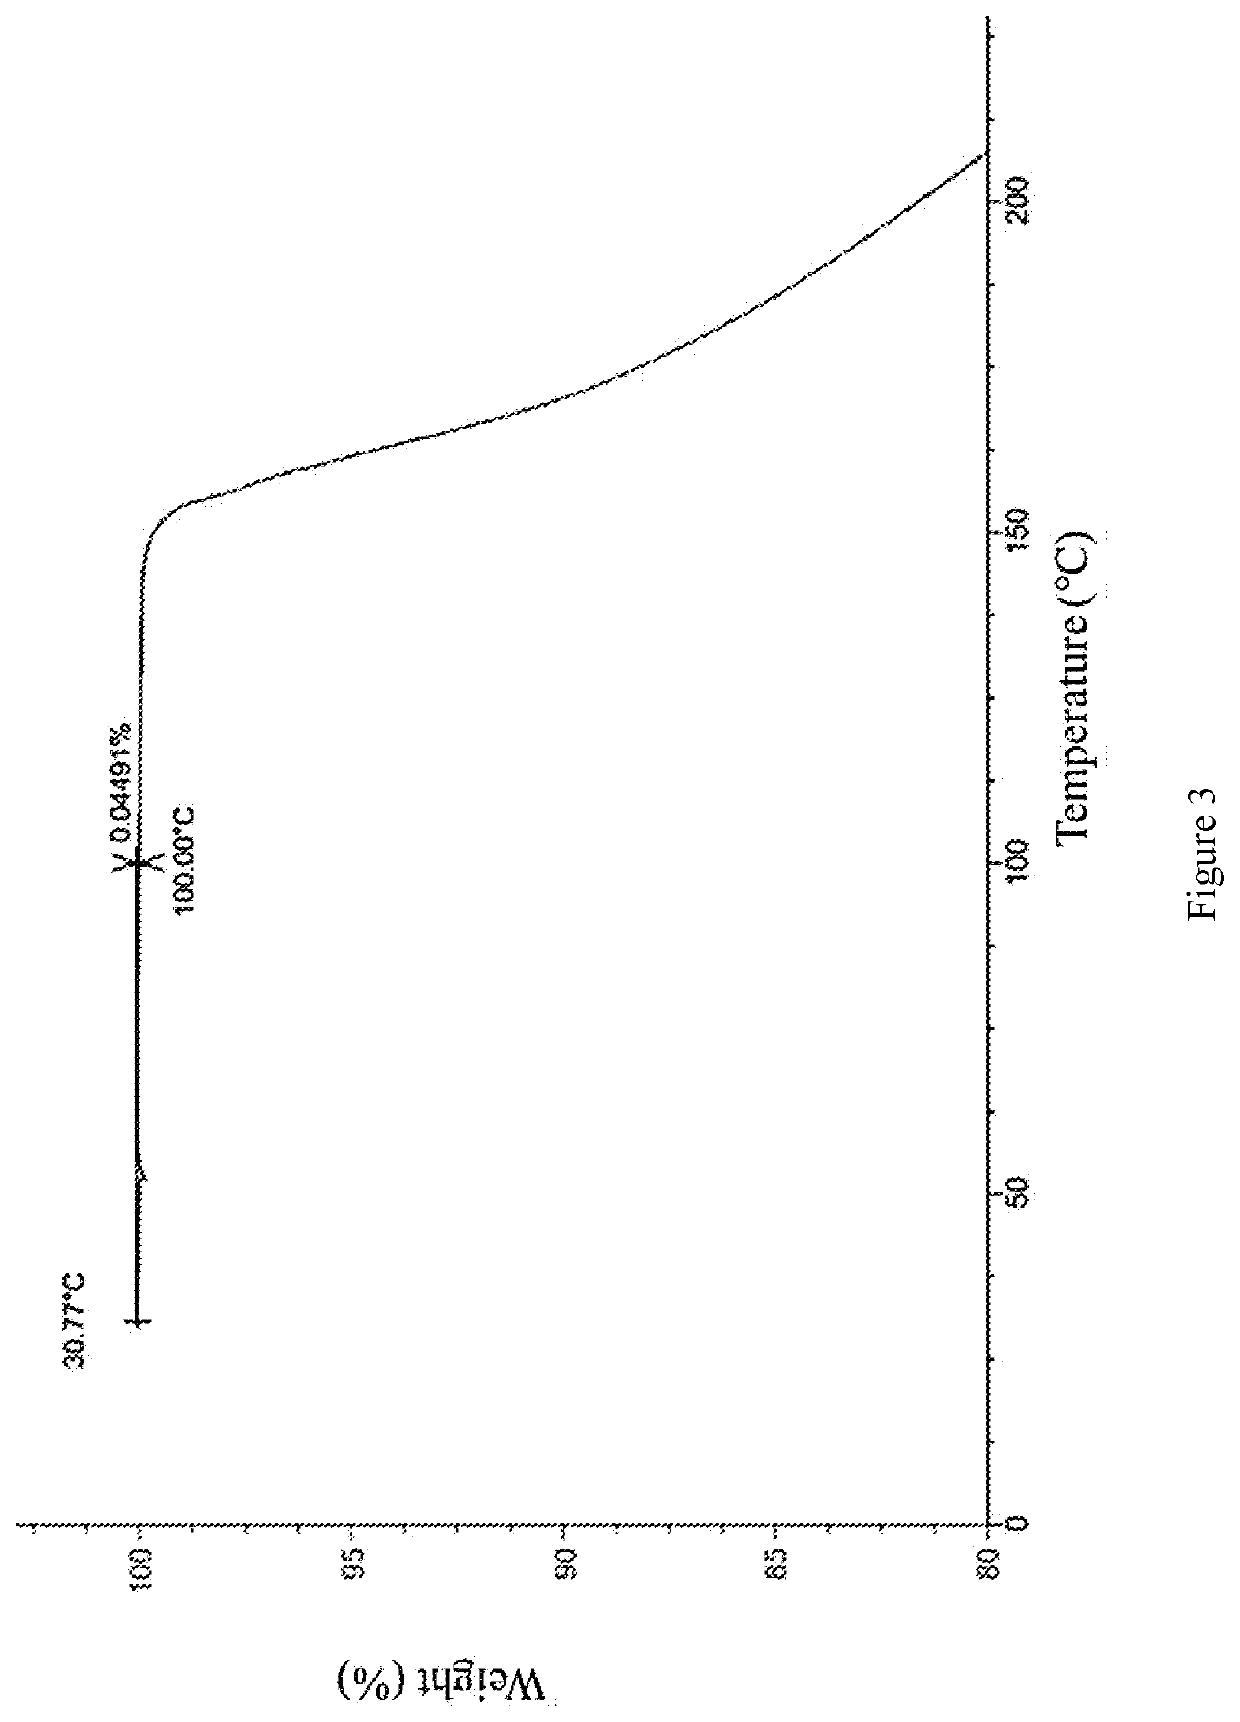 Crystal form of urat1 inhibitor, and preparation method therefor